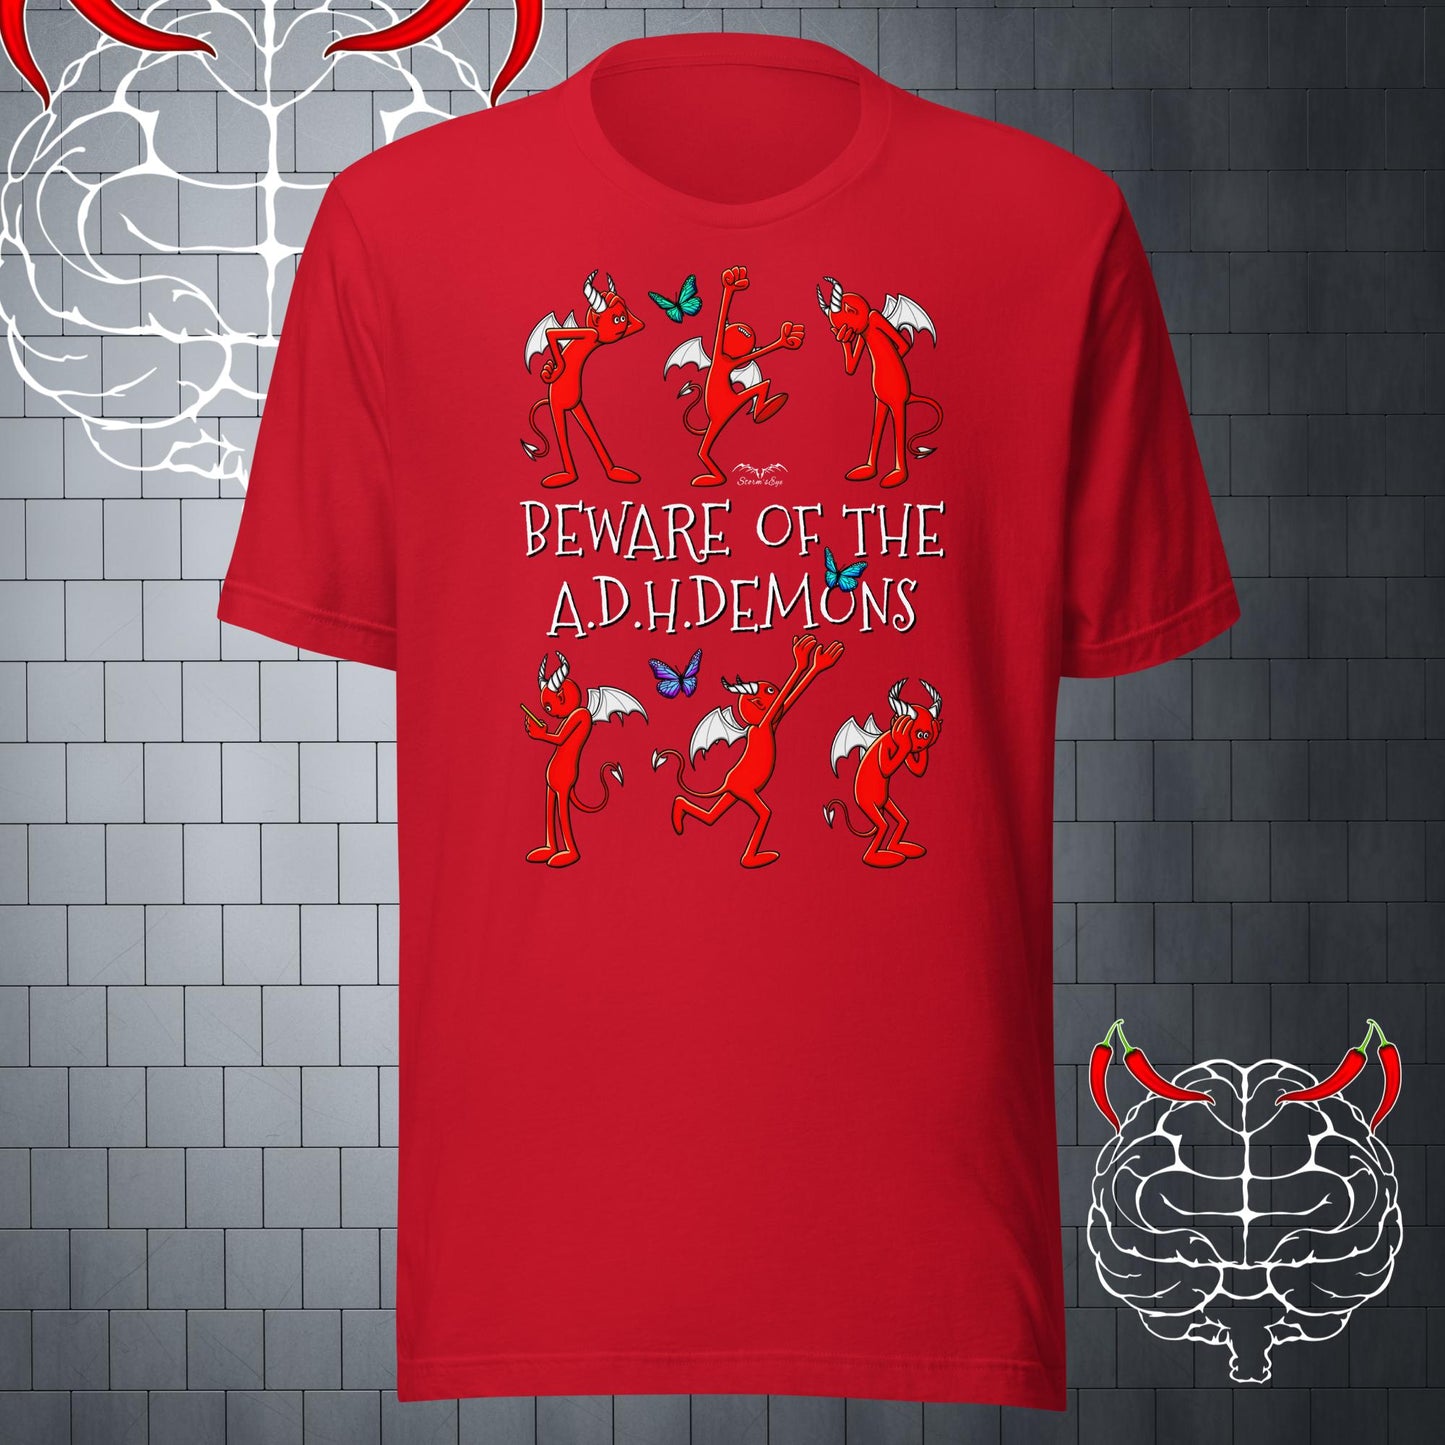 funny adhd demons t-shirt bright red by stormseye design